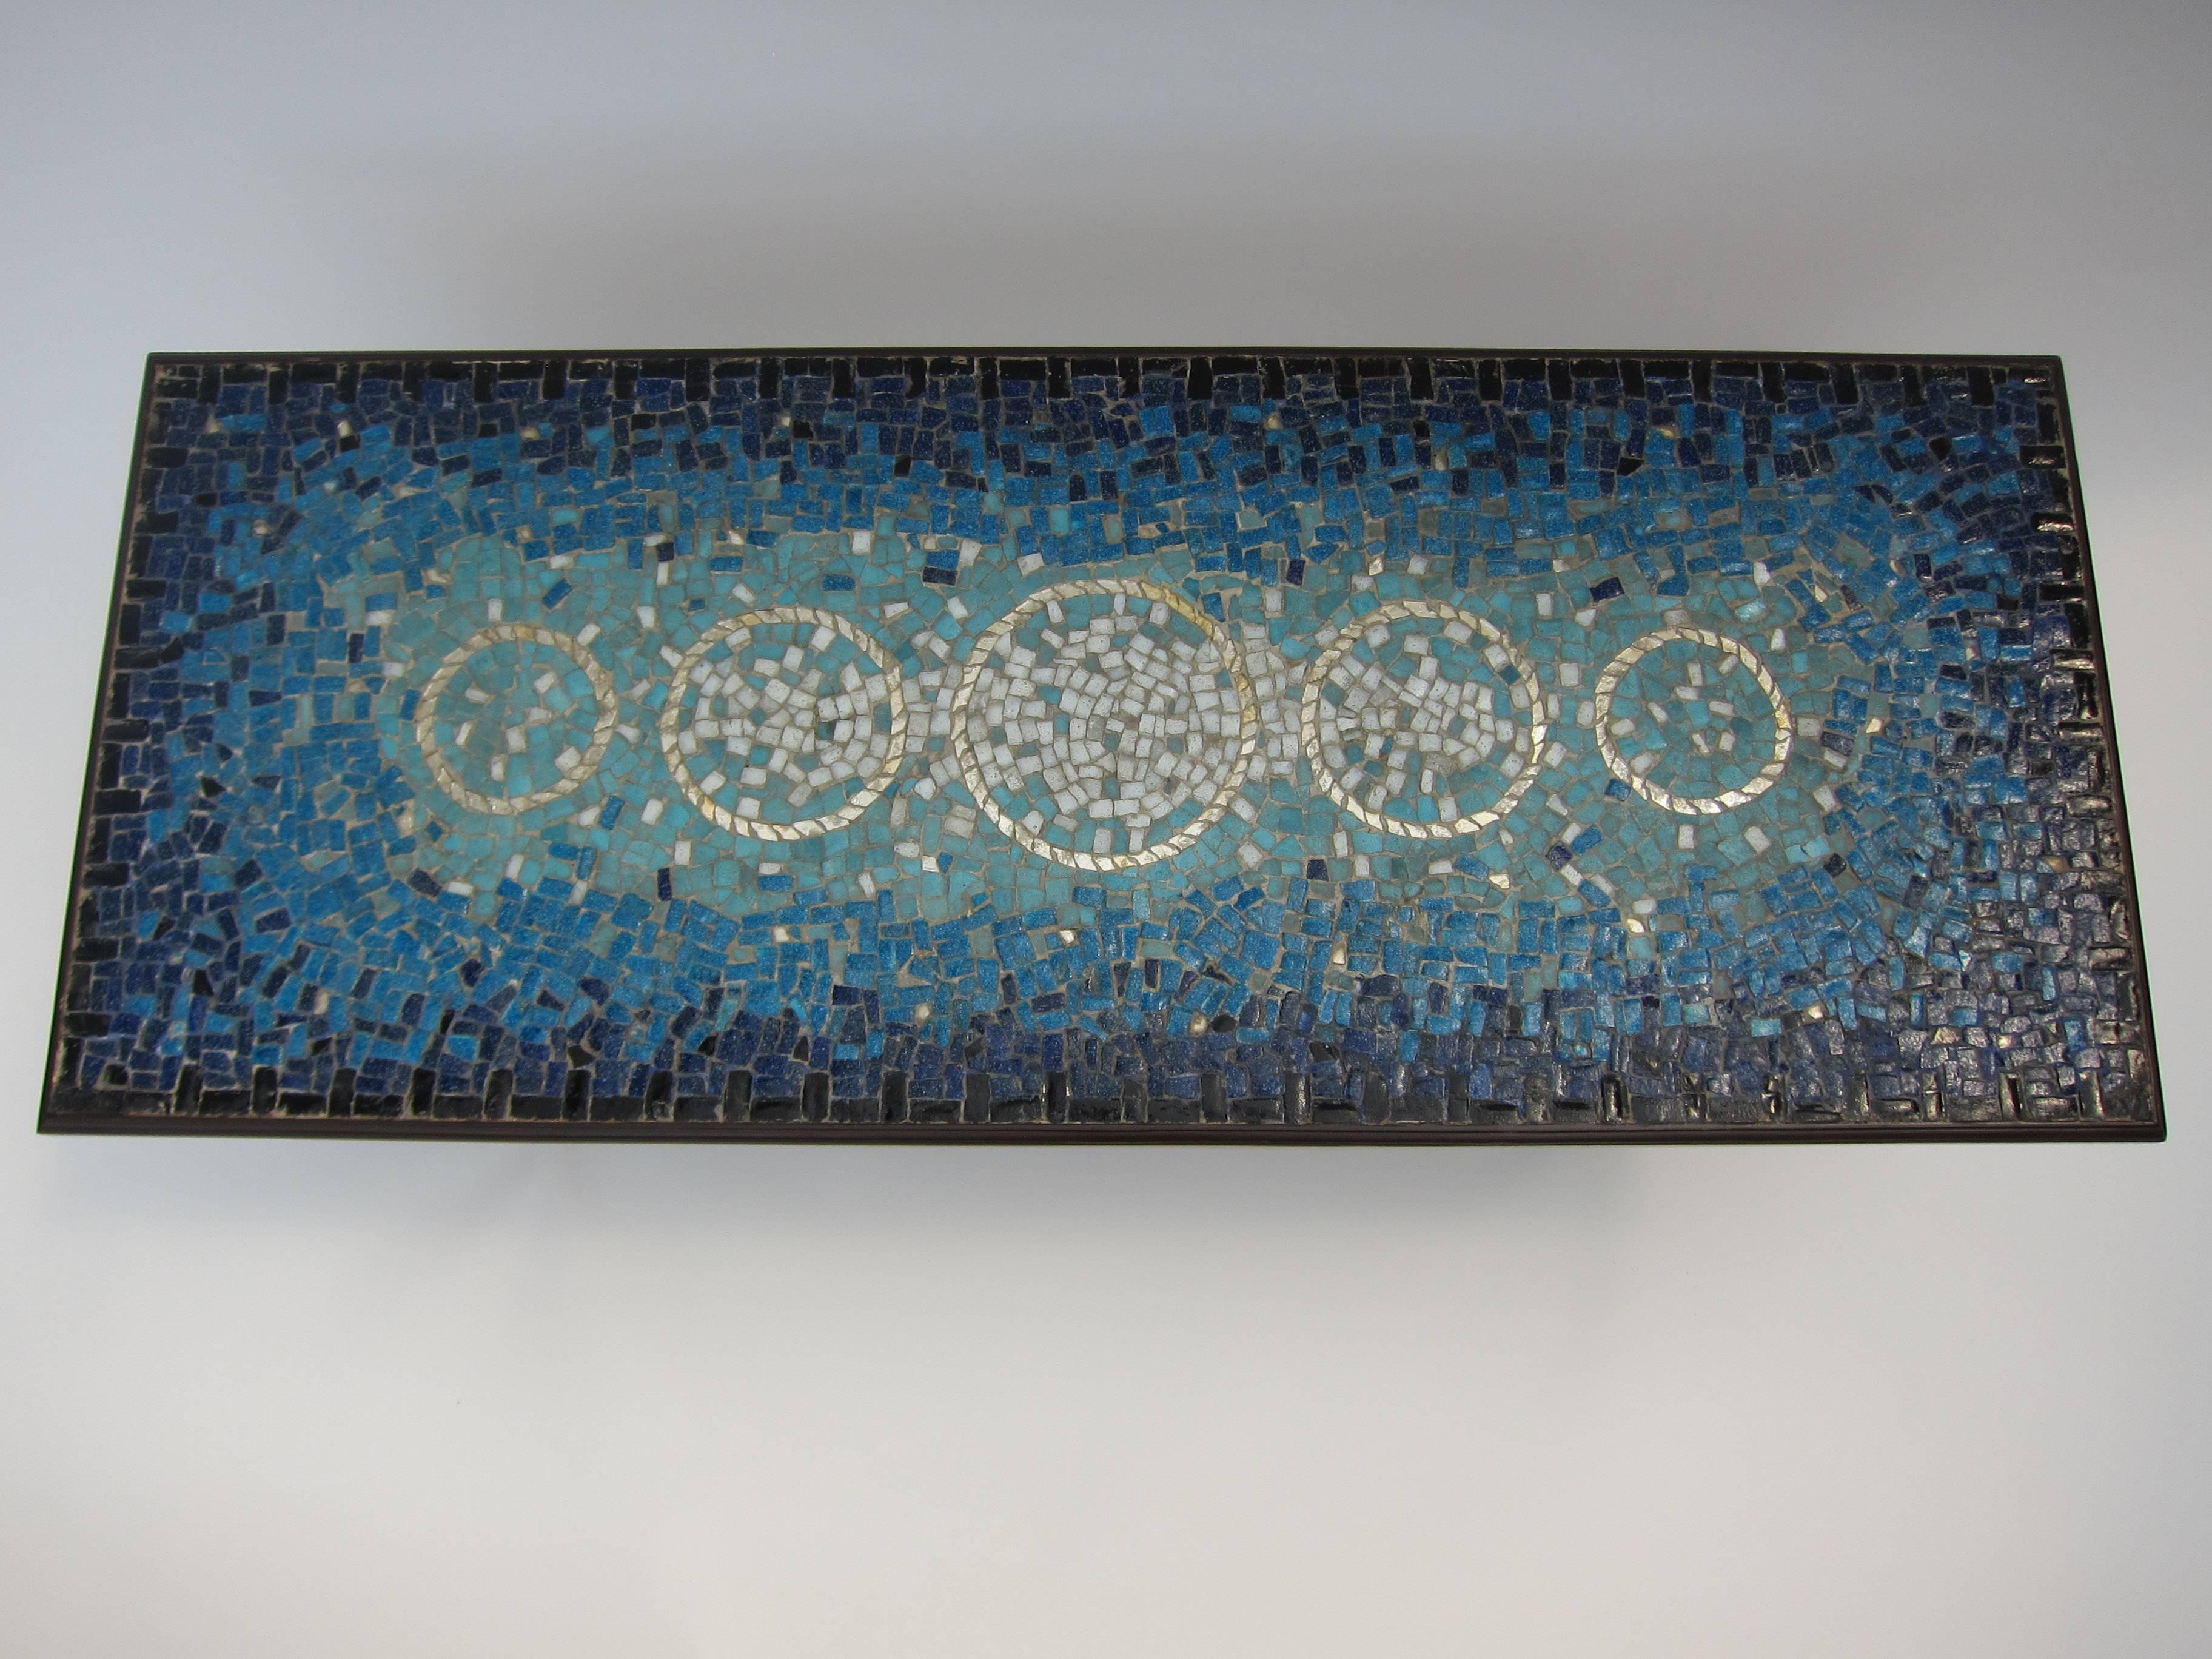 The Mexican modernist, Genaro Alvarez, is a name synonymous with excellence in mosaic craft and artistic expression. Whether it be murals or panels in furniture, Genaro was the master of mosaic craft here in Mid-Century Mexico. In this example,